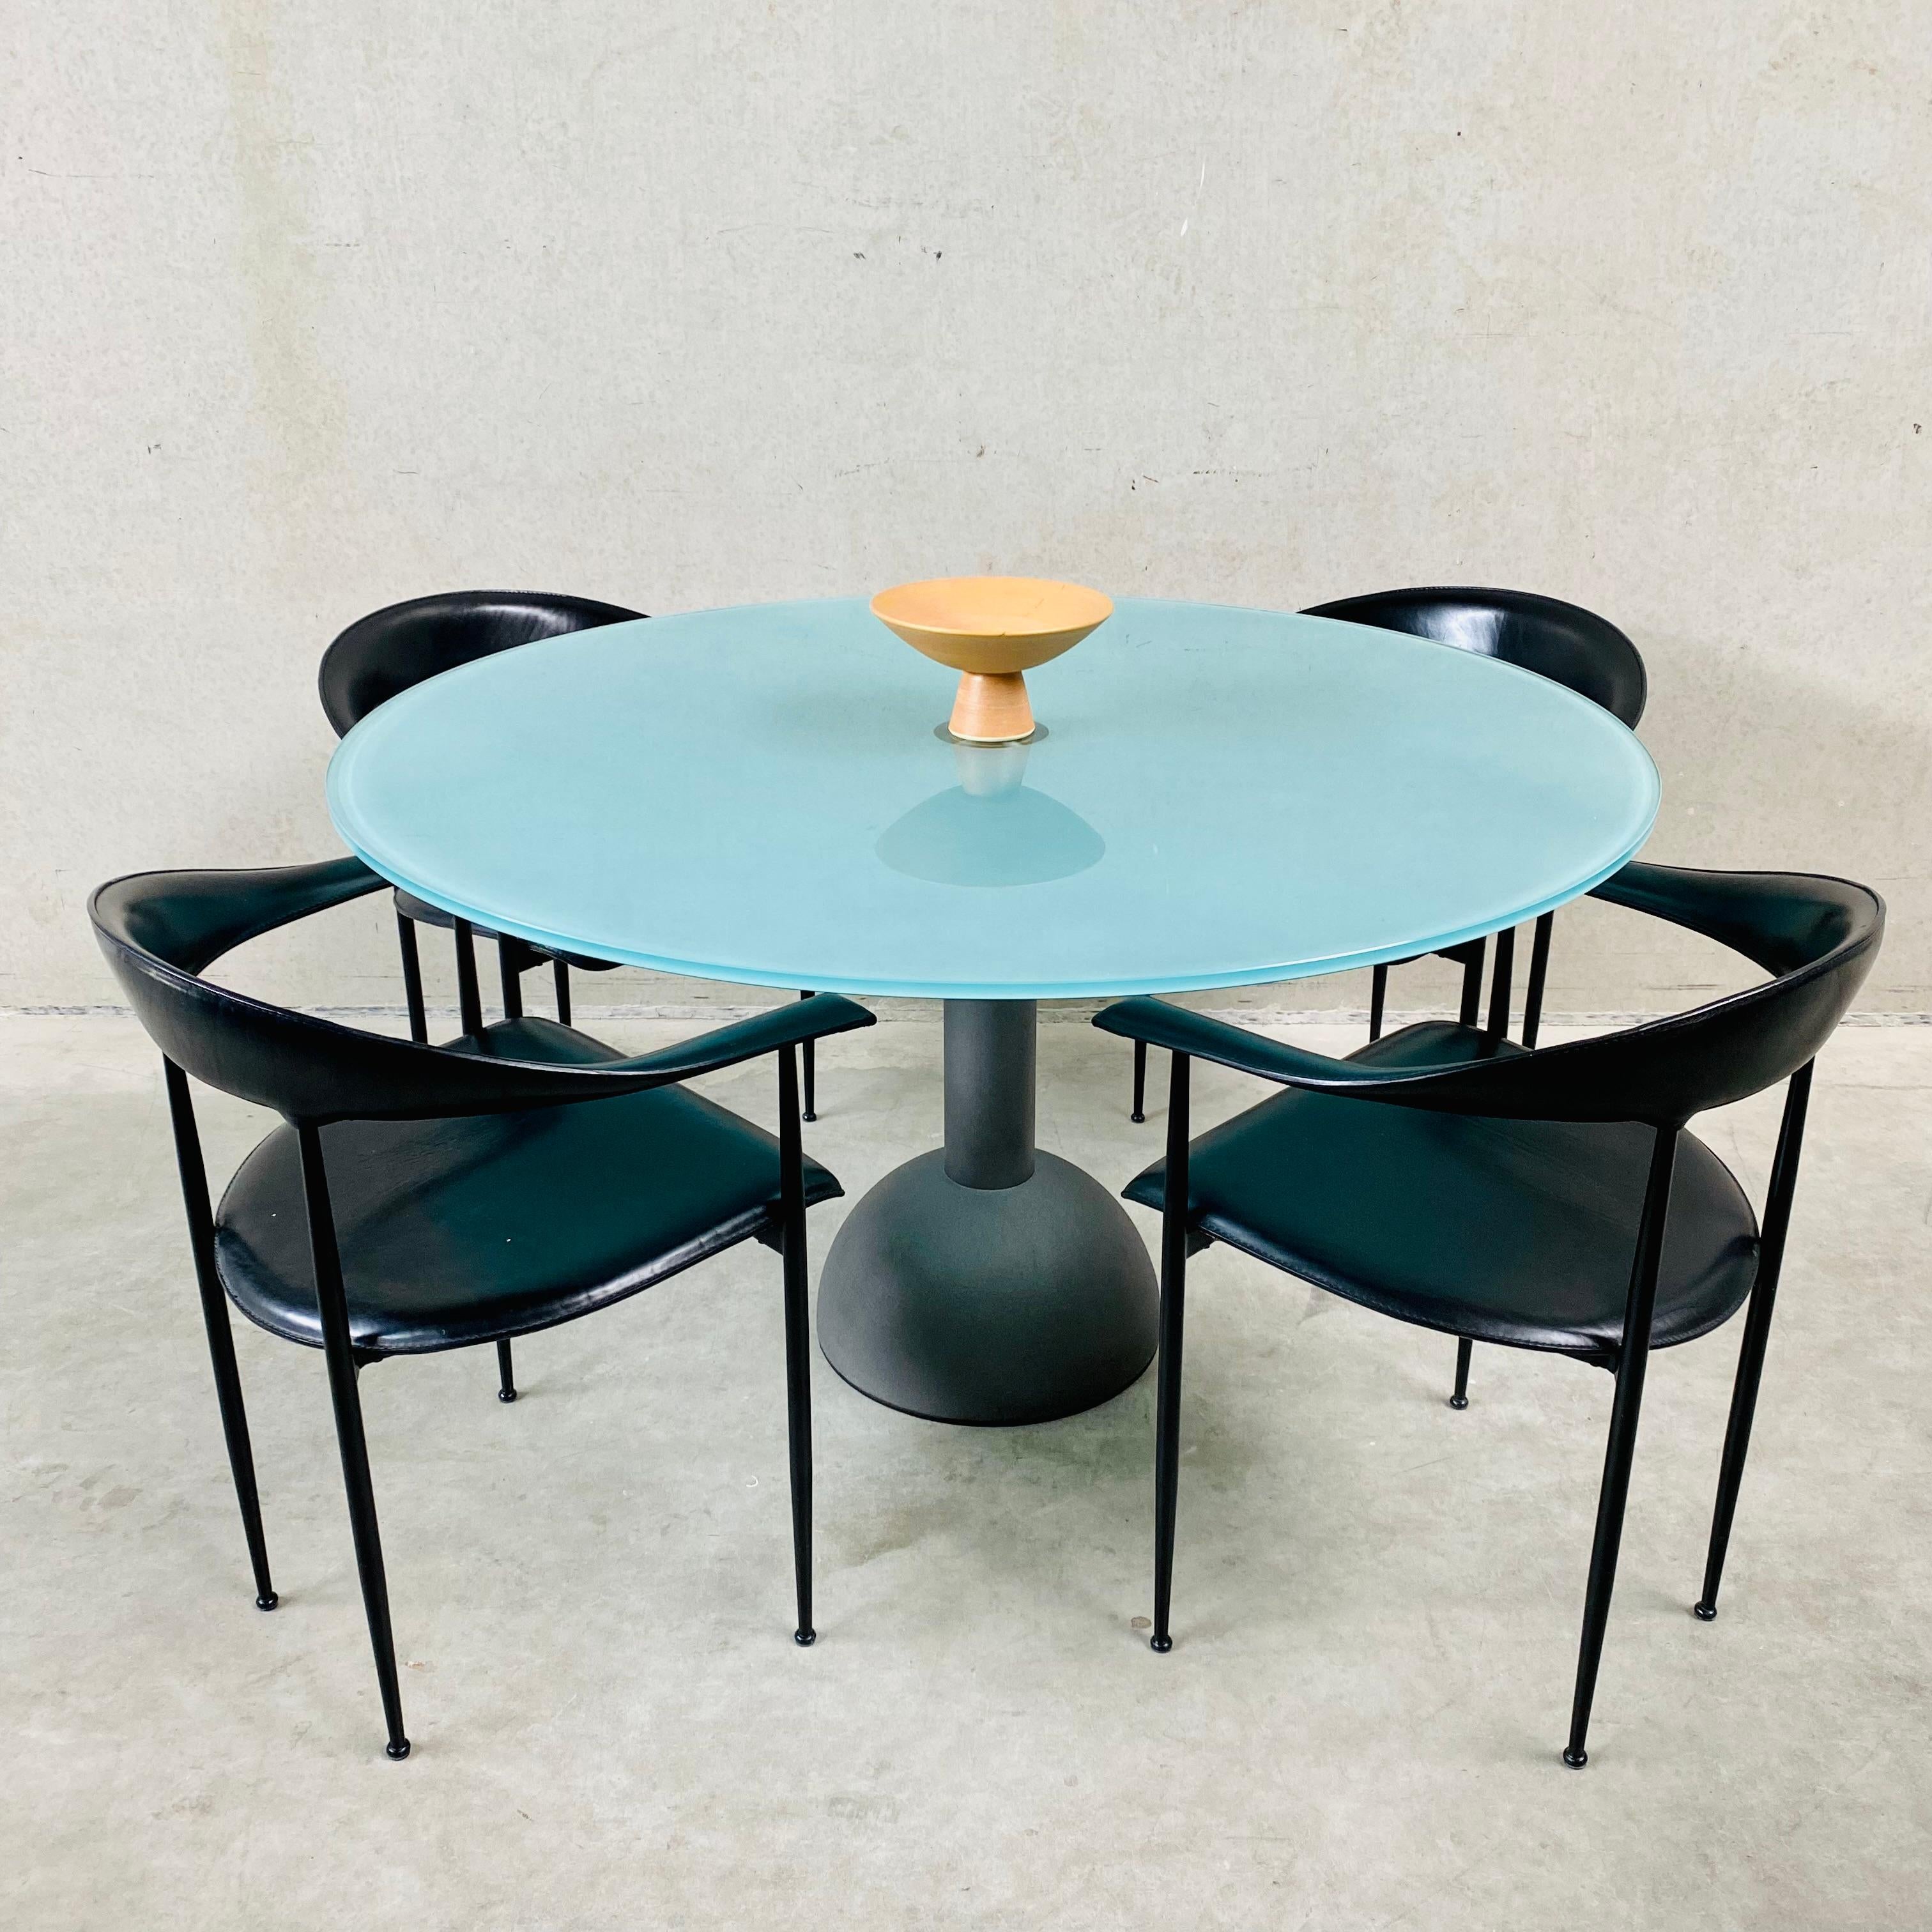 CALICE dining table by Massimo & Lella Vignelli for Poltrona frau, Italy 1980s

Introducing the stunning Glass Dining Table 